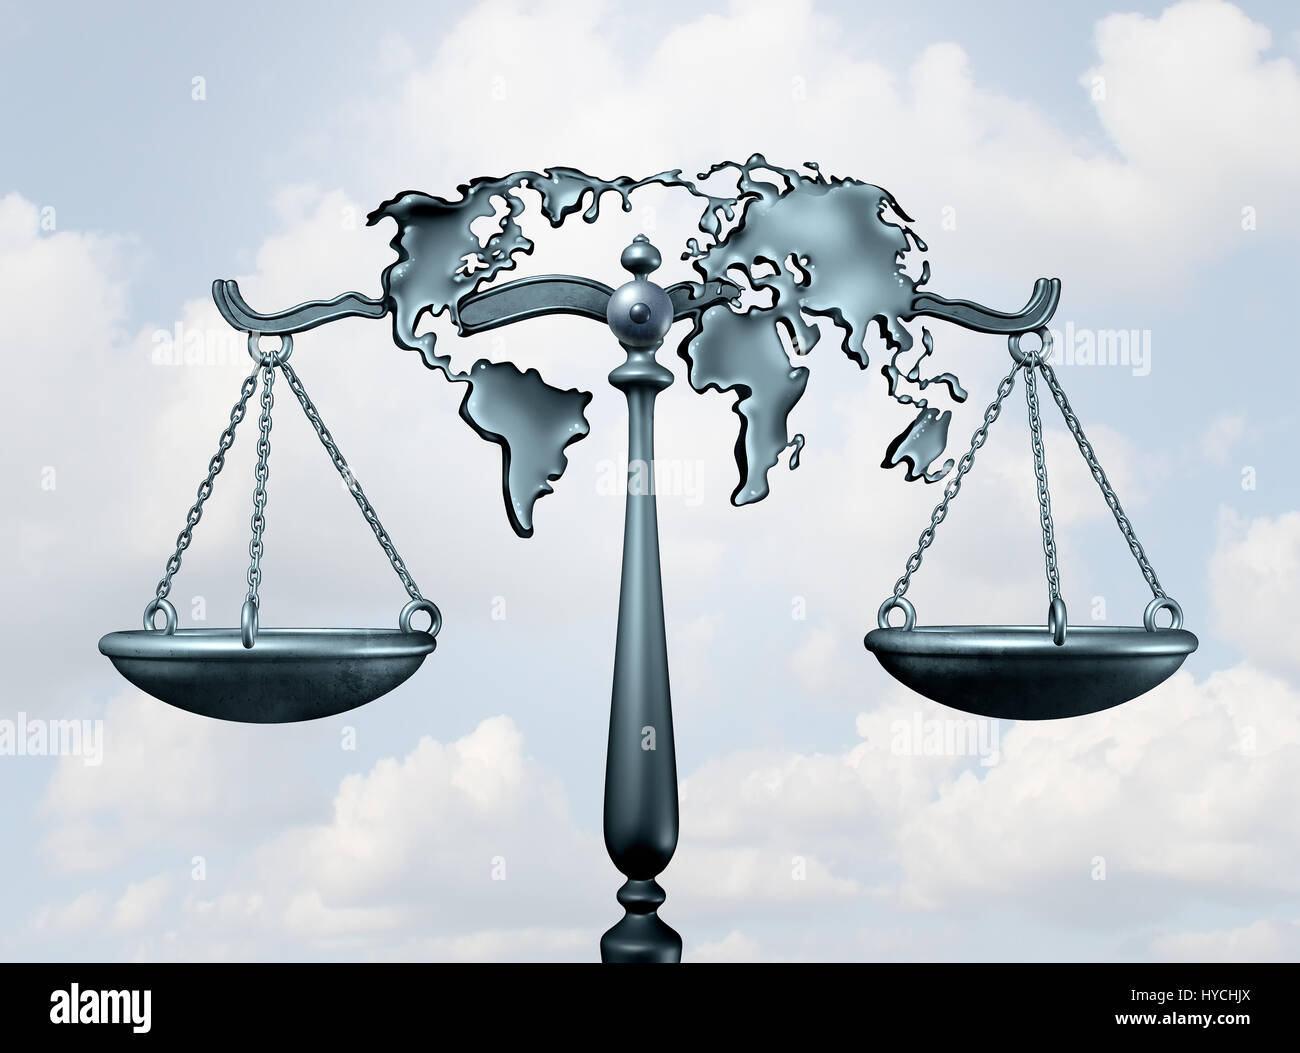 International law and global legal system concept as a justice scale shaped as the world as a metaphor for diplomatic treaty agreement. Stock Photo